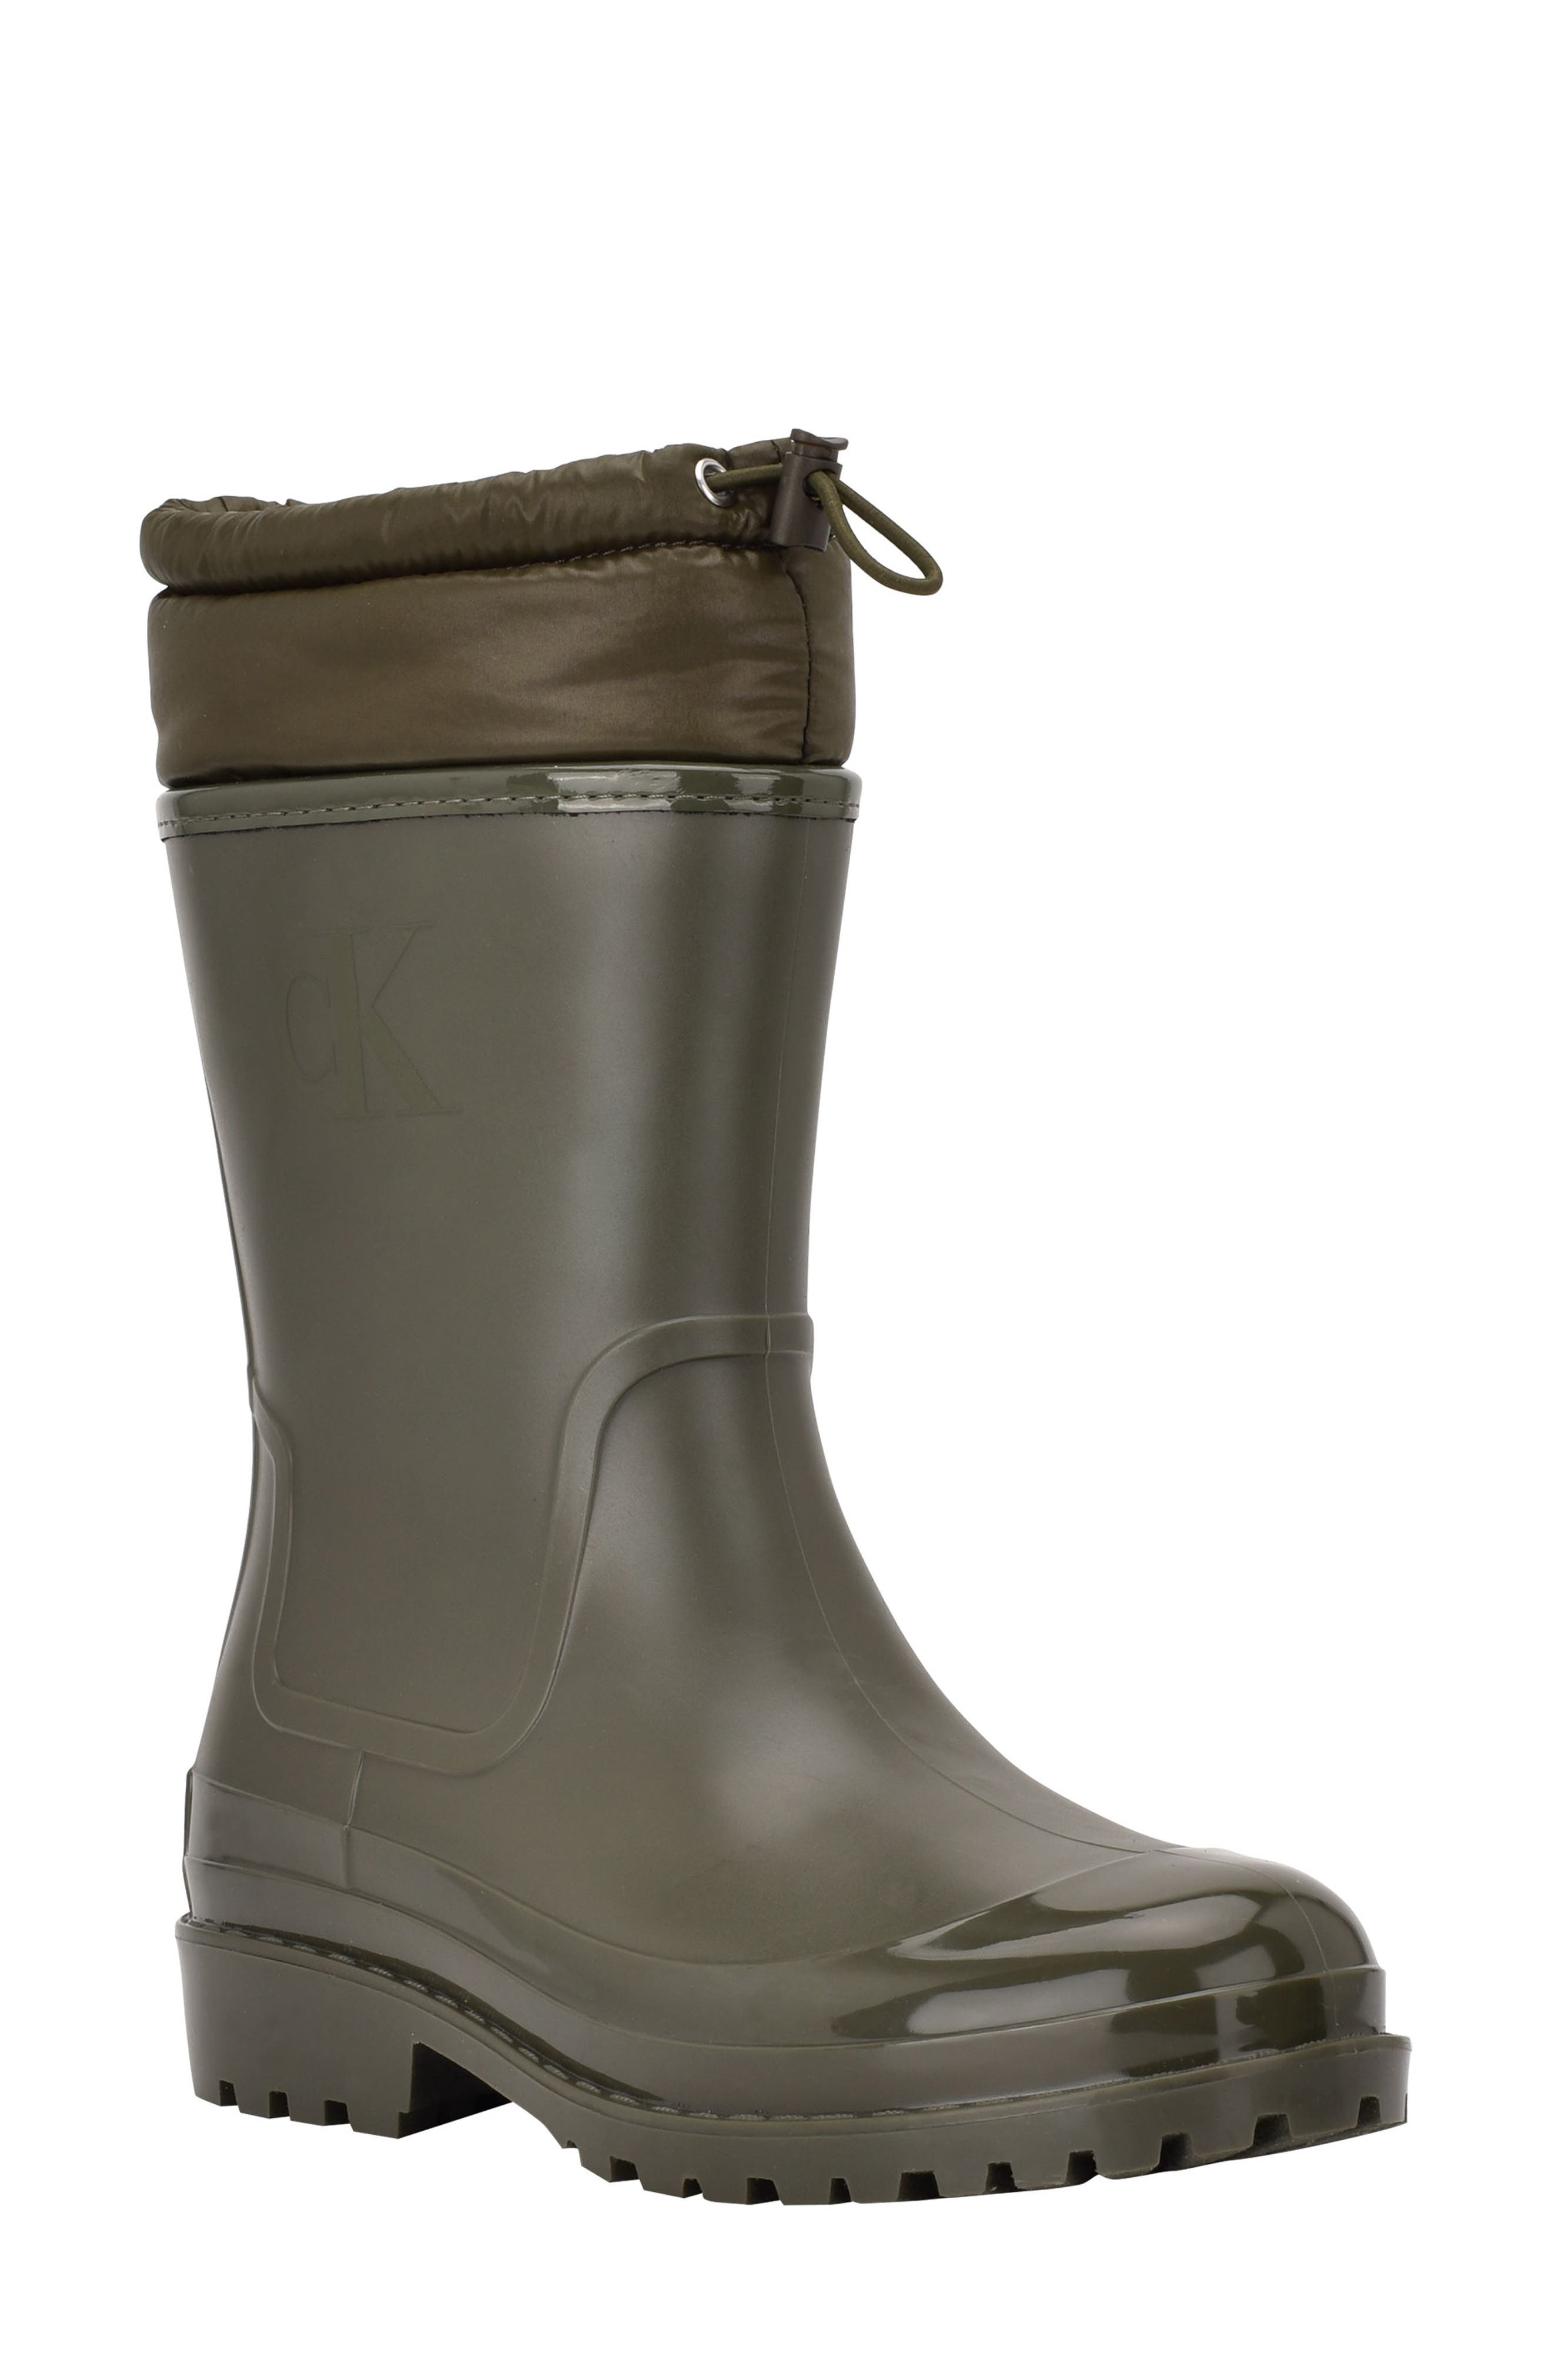 UPC 195972665255 product image for Calvin Klein Abay Rain Boot in Dark Green 301 at Nordstrom, Size 9 | upcitemdb.com